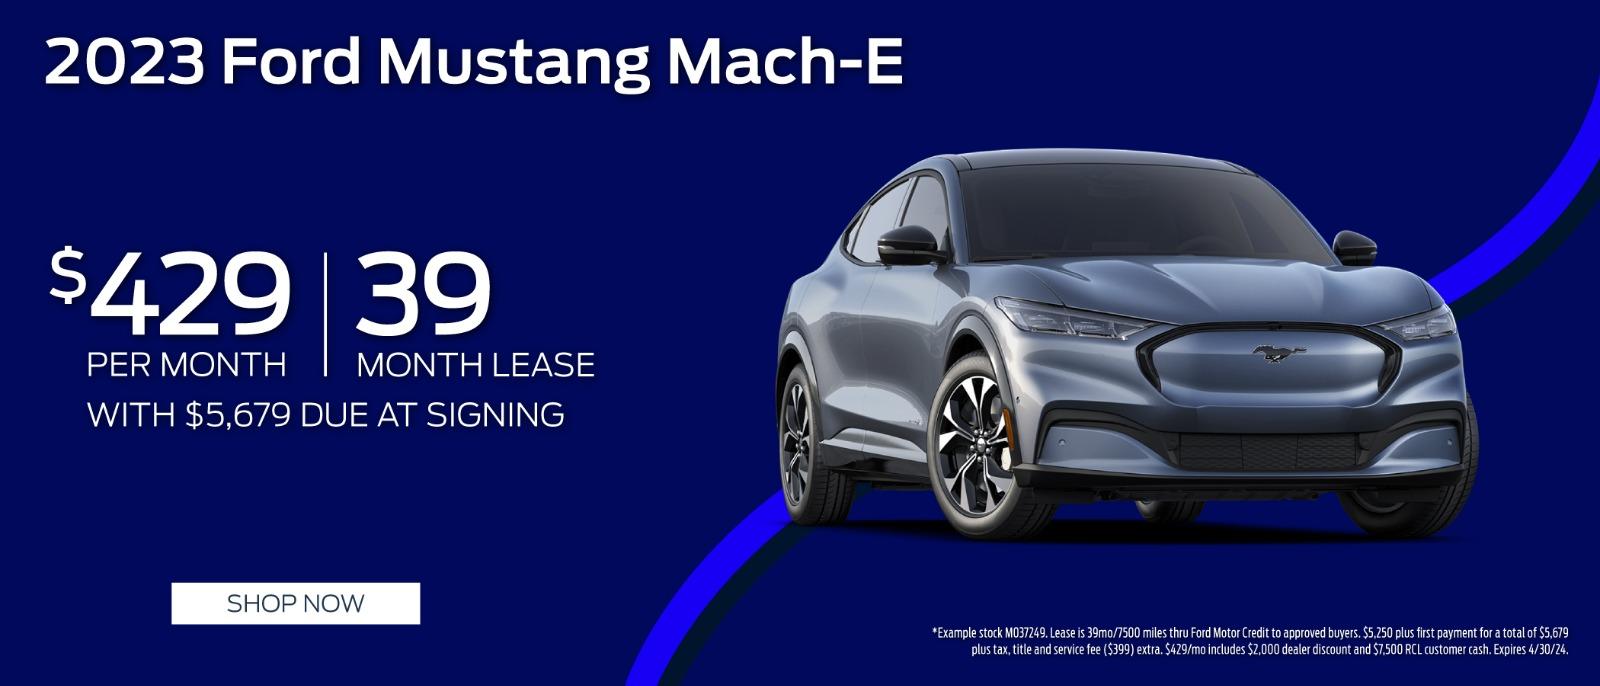 2023 Ford Mustang Mach-E $429 per month for 36 months with $5,679 due at signing